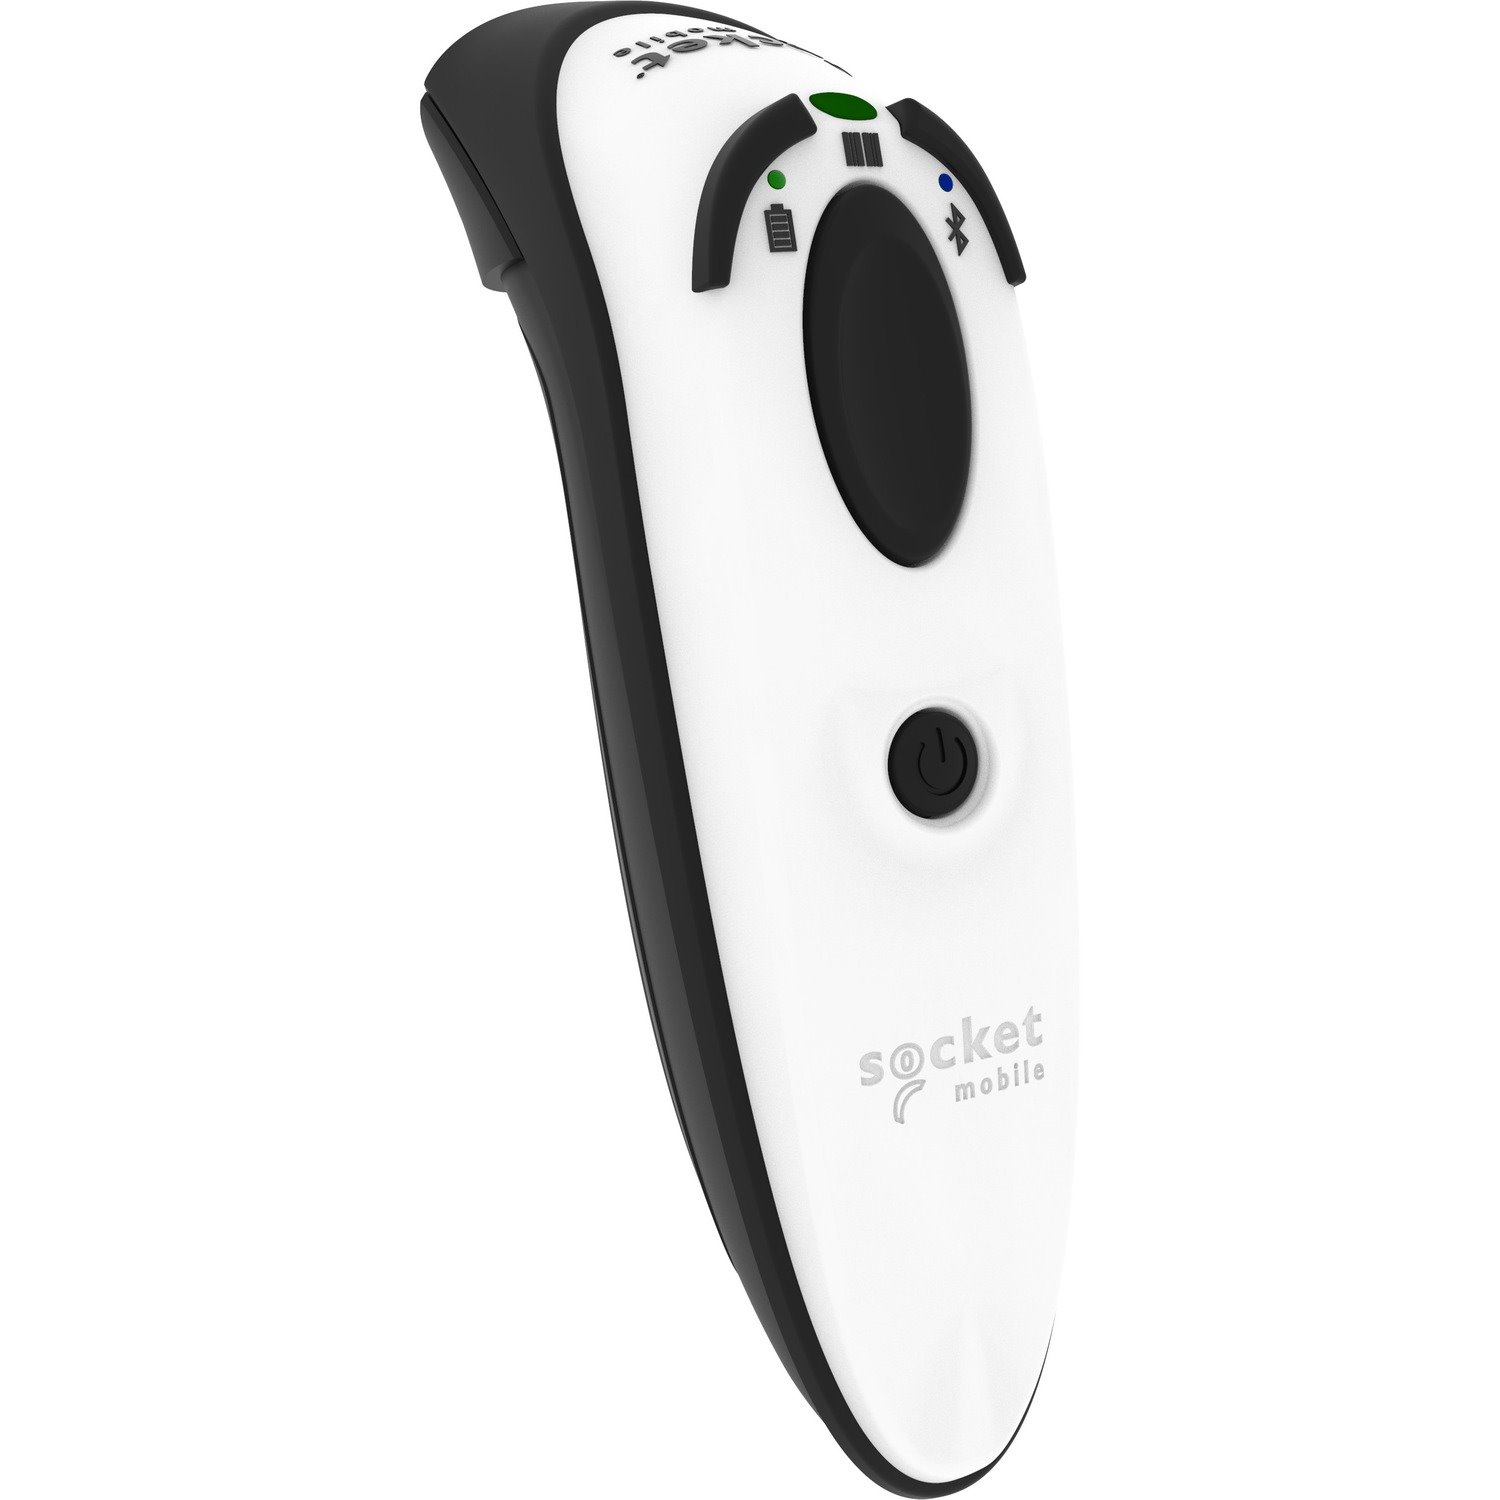 Socket Mobile DuraScan D720 Rugged Retail, Transportation, Warehouse, Manufacturing, Field Sales/Service, Healthcare, Asset Tracking, Warehouse Handheld Barcode Scanner - Wireless Connectivity - White